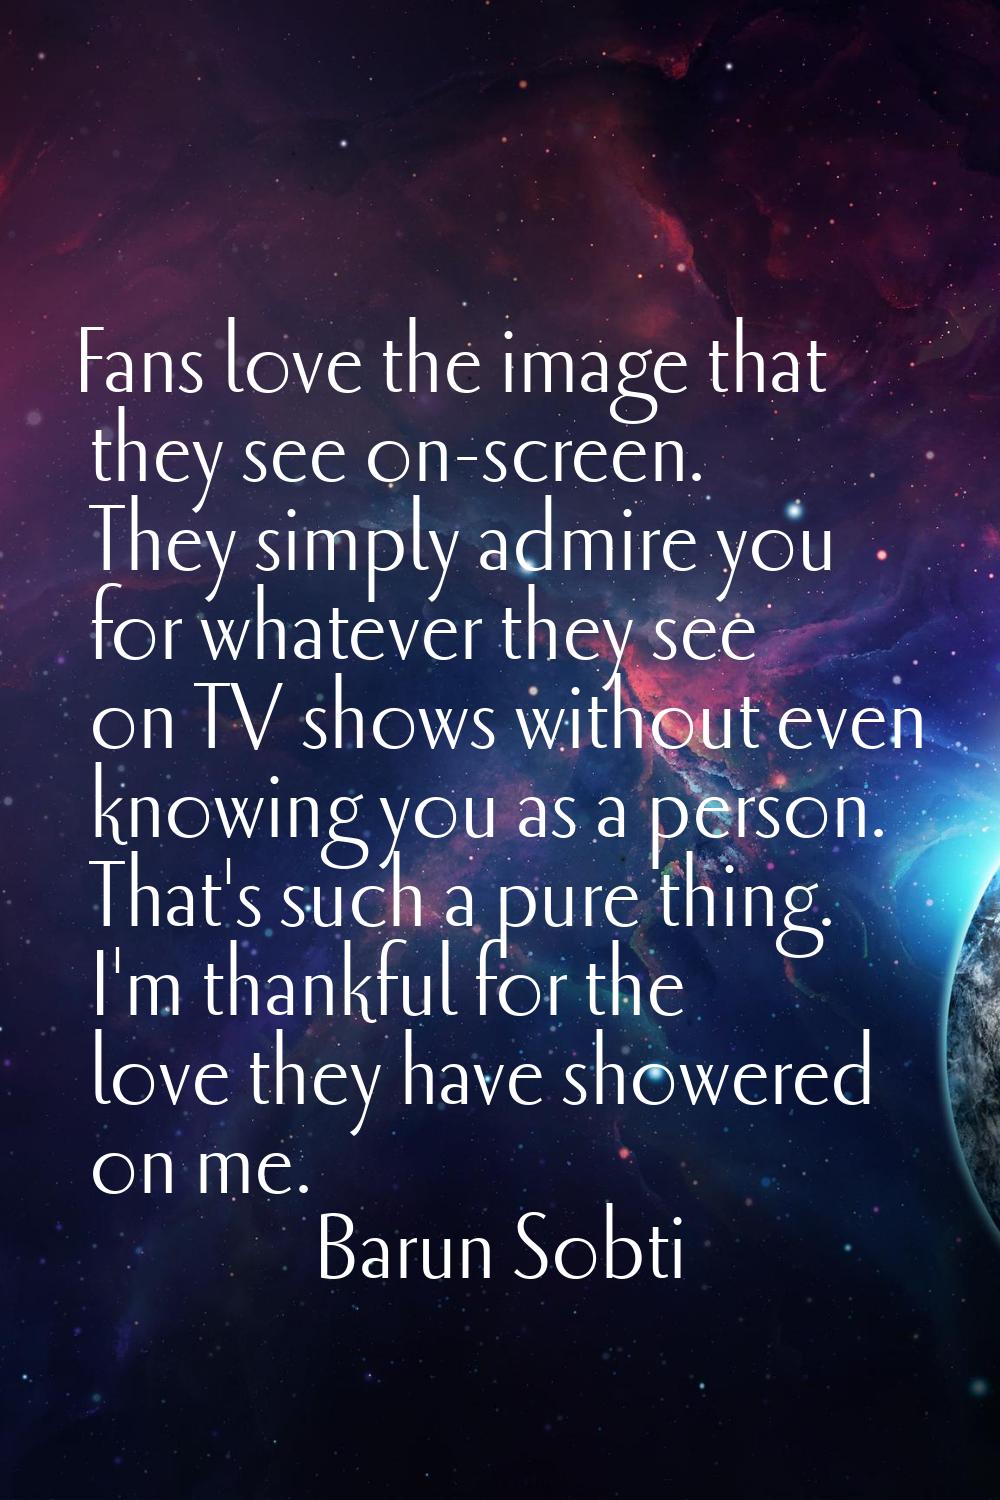 Fans love the image that they see on-screen. They simply admire you for whatever they see on TV sho